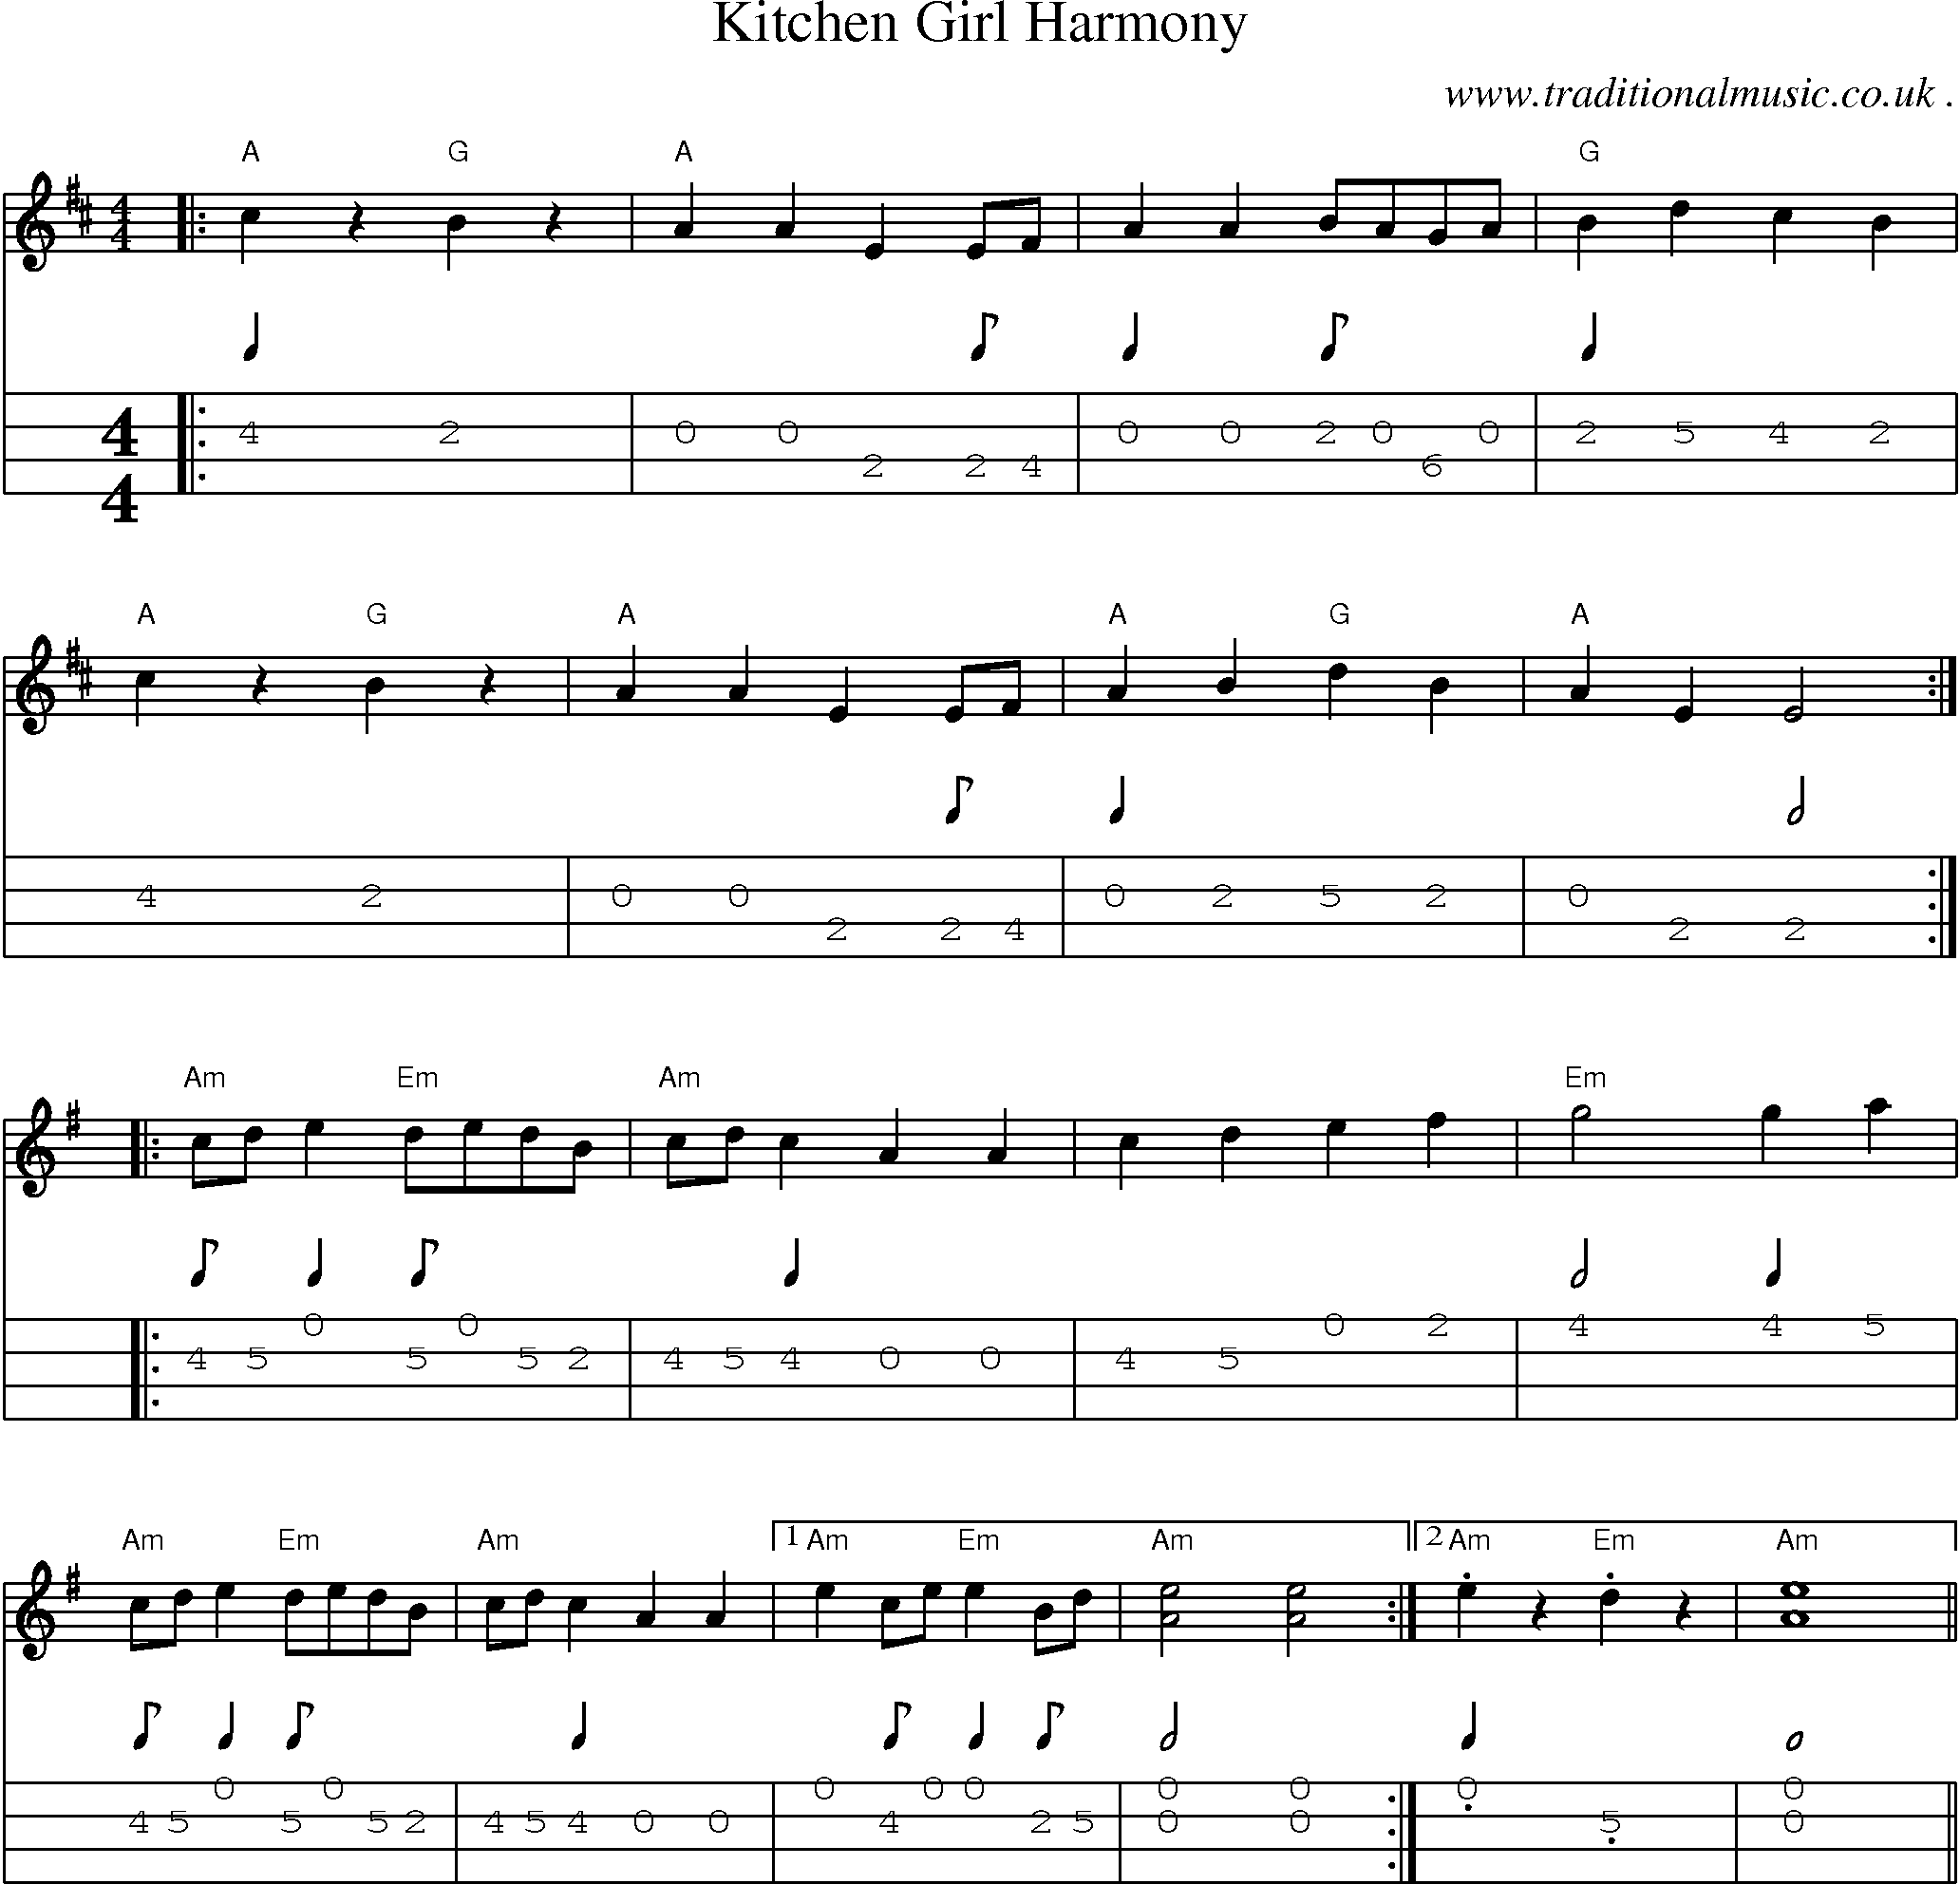 Music Score and Guitar Tabs for Kitchen Girl Harmony